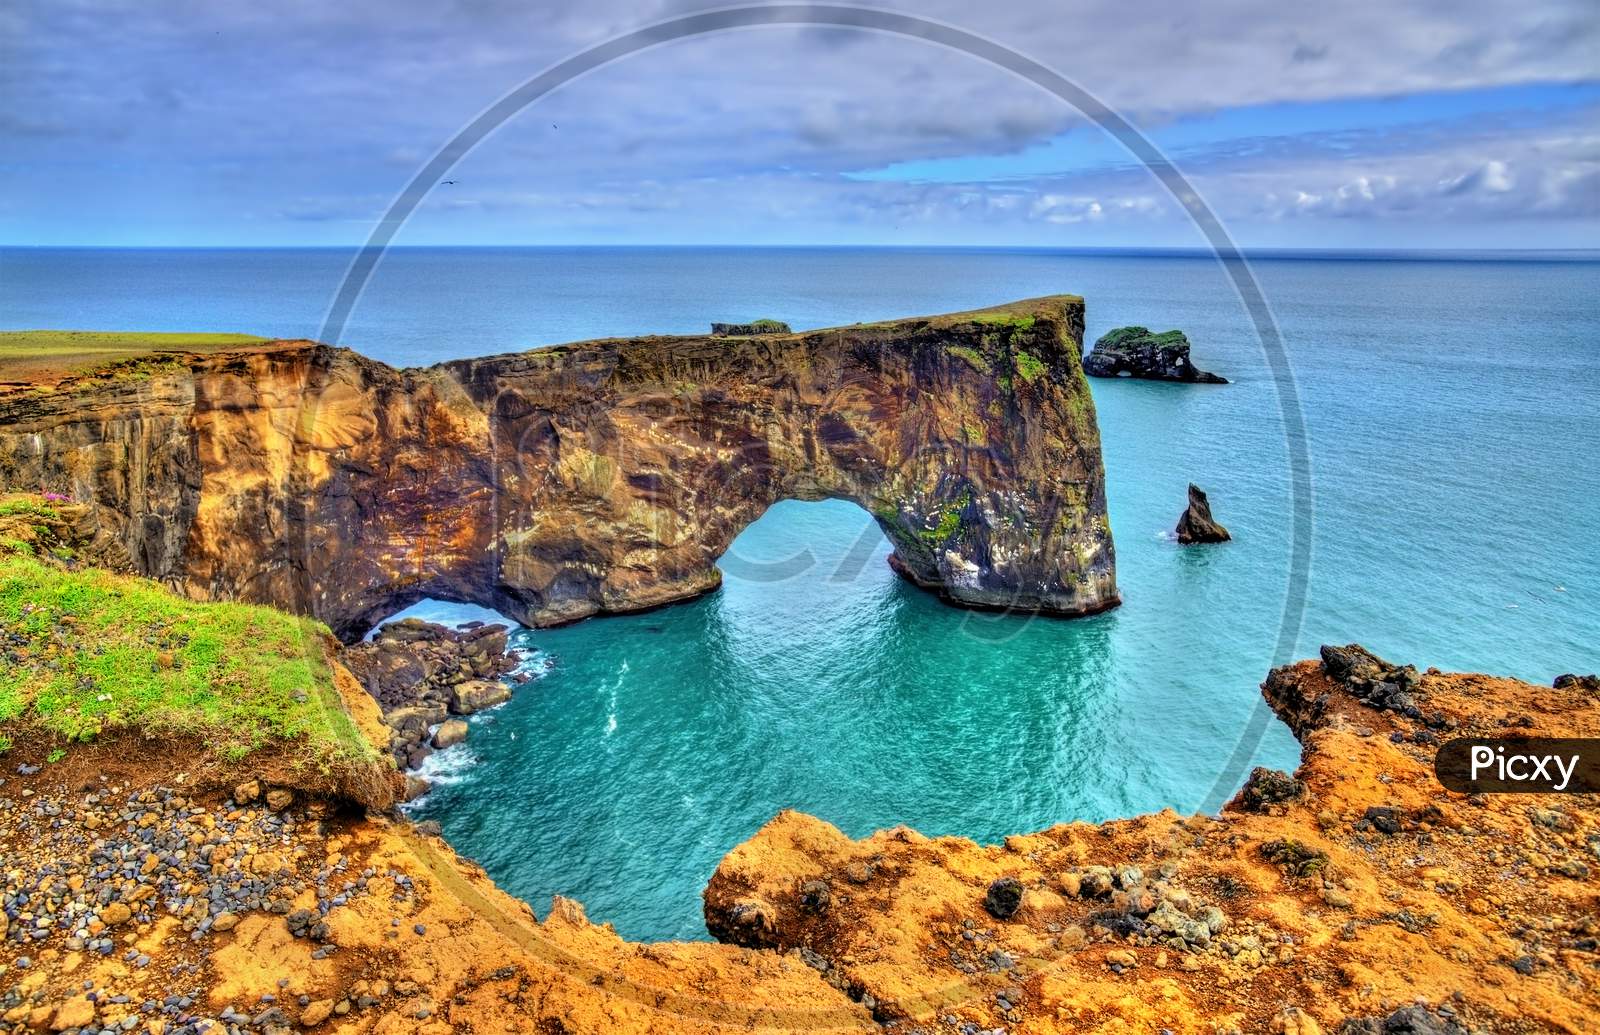 Natural Arch Of Dyrholaey Peninsula - Iceland